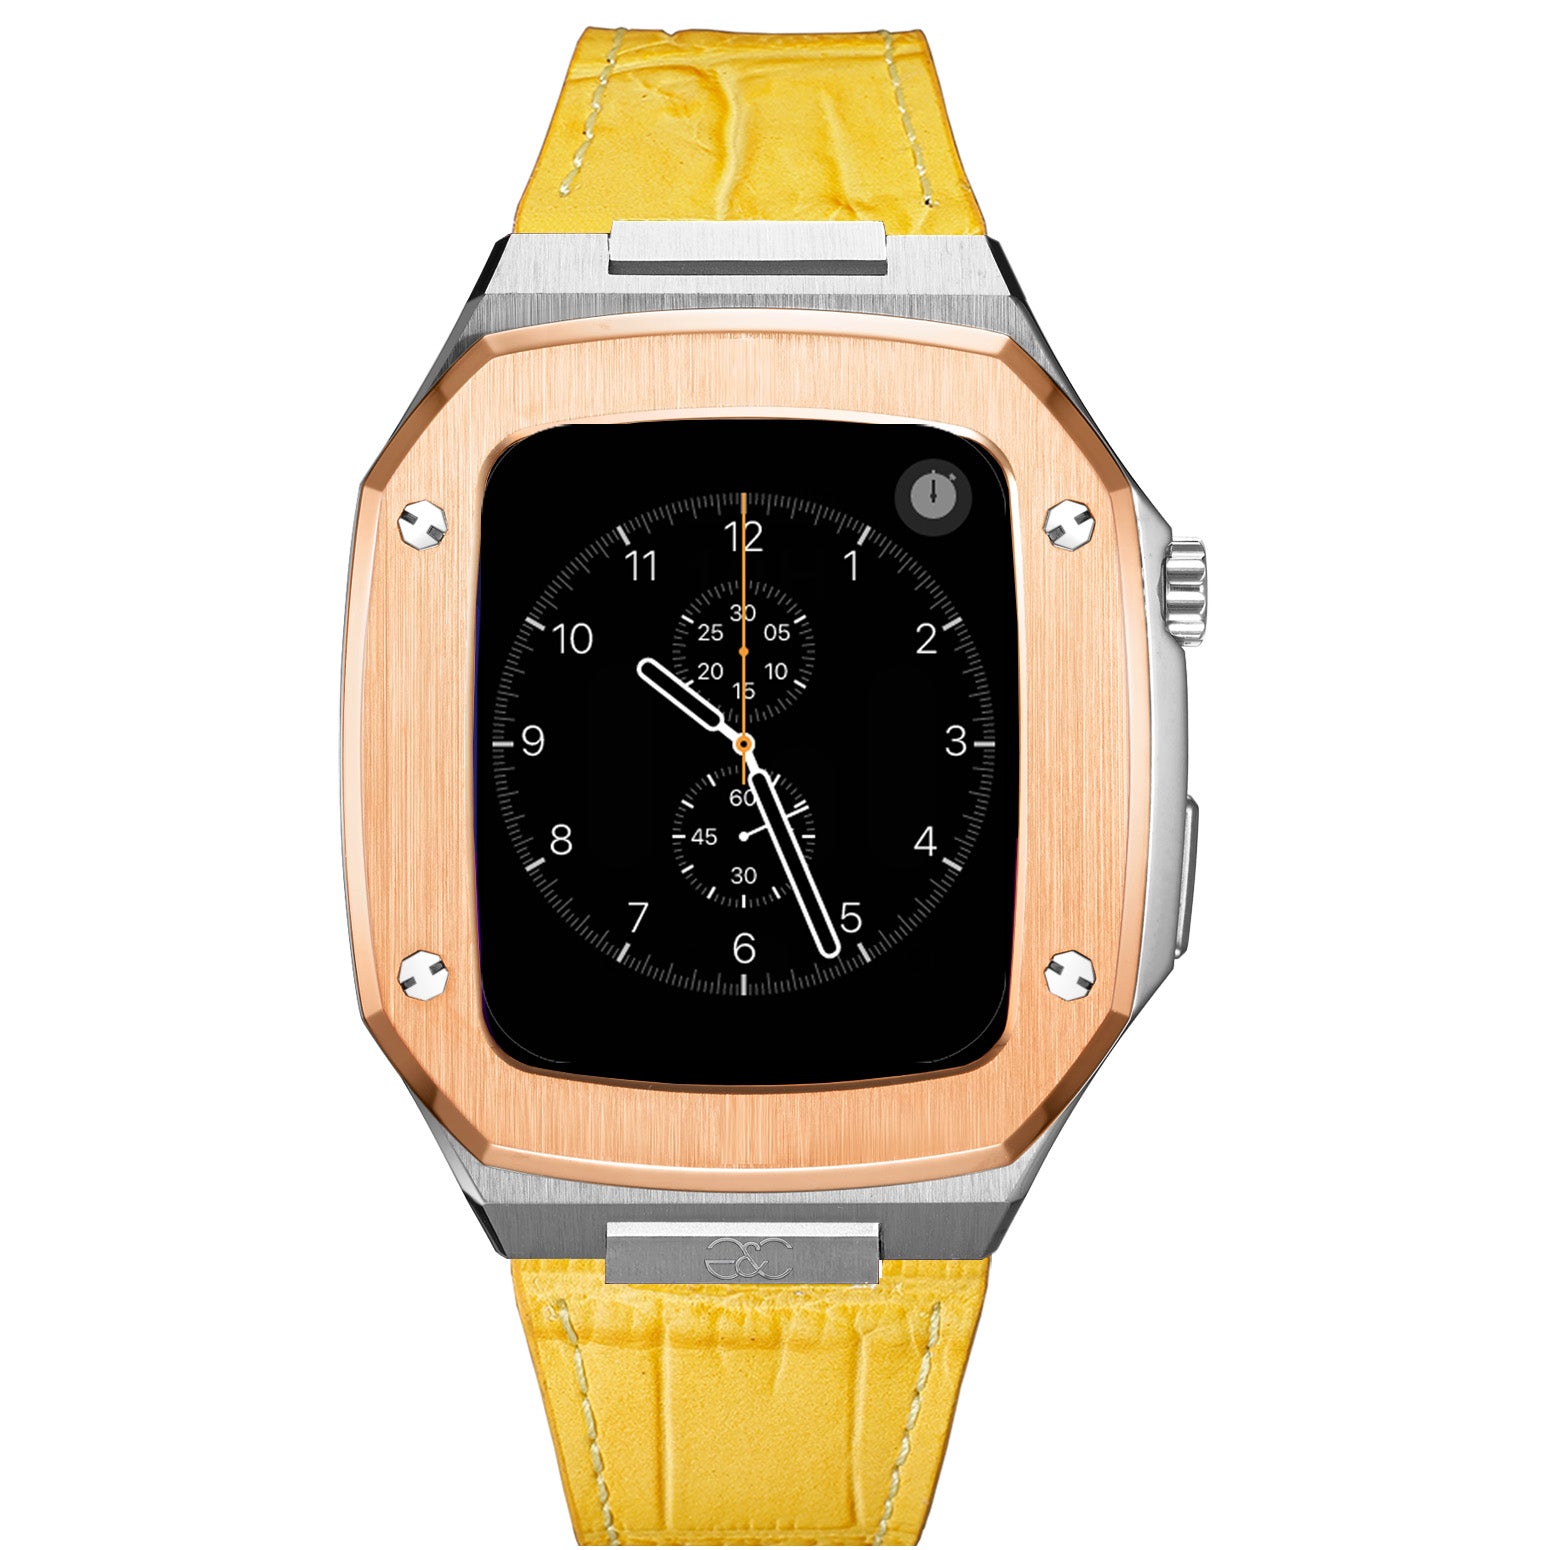 Apple Watch R.Gold on Silver Steel case (Leather band) - Gold & Cherry